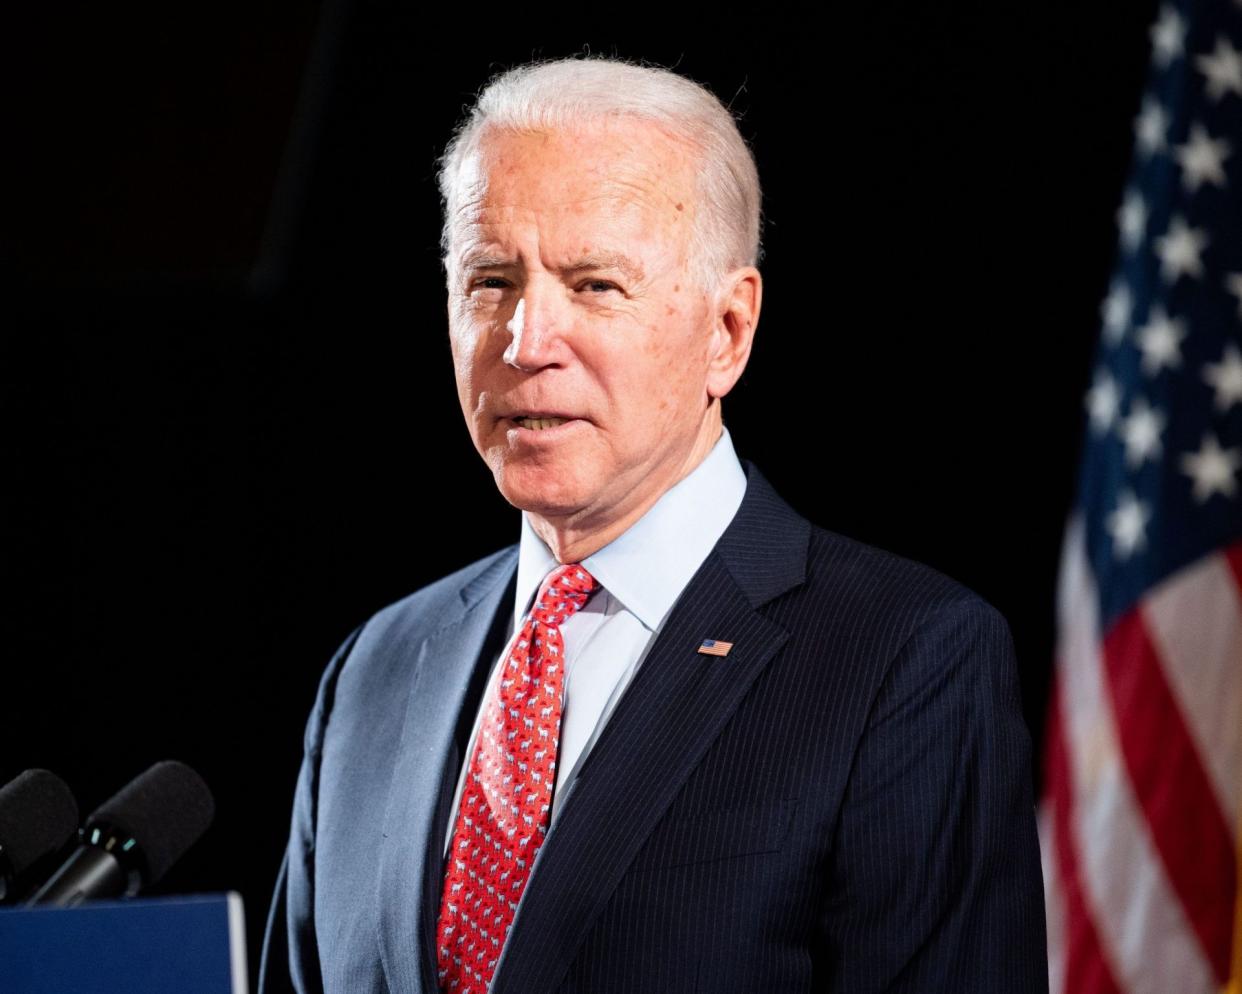 Mandatory Credit: Photo by Michael Brochstein/SOPA Images/Shutterstock (10581724h)Former Vice President Joe Biden speaks about the Coronavirus and the response to it at the Hotel Du PontJoe Biden, US Presidential Election Campaiging, Wilmington, USA - 12 Mar 2020.